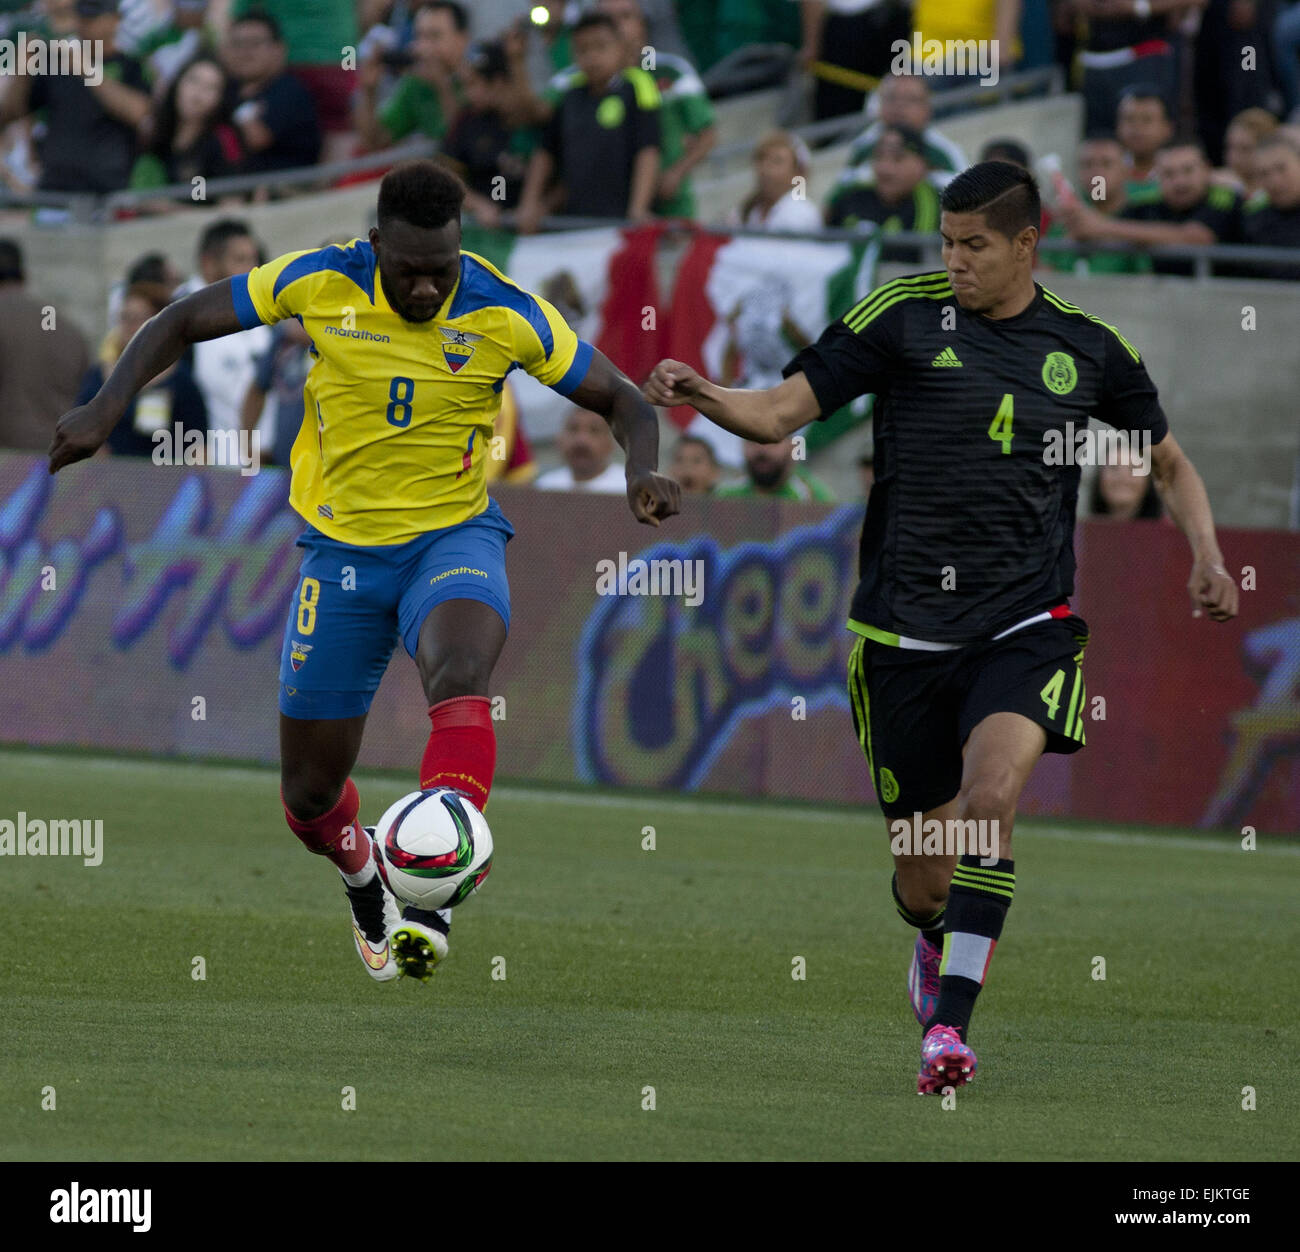 Los Angeles, CALIFORNIA, UNITED STATES OF AMERICA, USA. 28th Mar, 2015. Mexican player (4) Hugo Ayala fights for the ball with Ecuadorian player Felipe Caicedo during thee first half of their game at the Los Angeles Memorial Coliseum for the friendly game today Saturday 28 March 2015.ARMANDO ARORIZO © Armando Arorizo/Prensa Internacional/ZUMA Wire/Alamy Live News Stock Photo